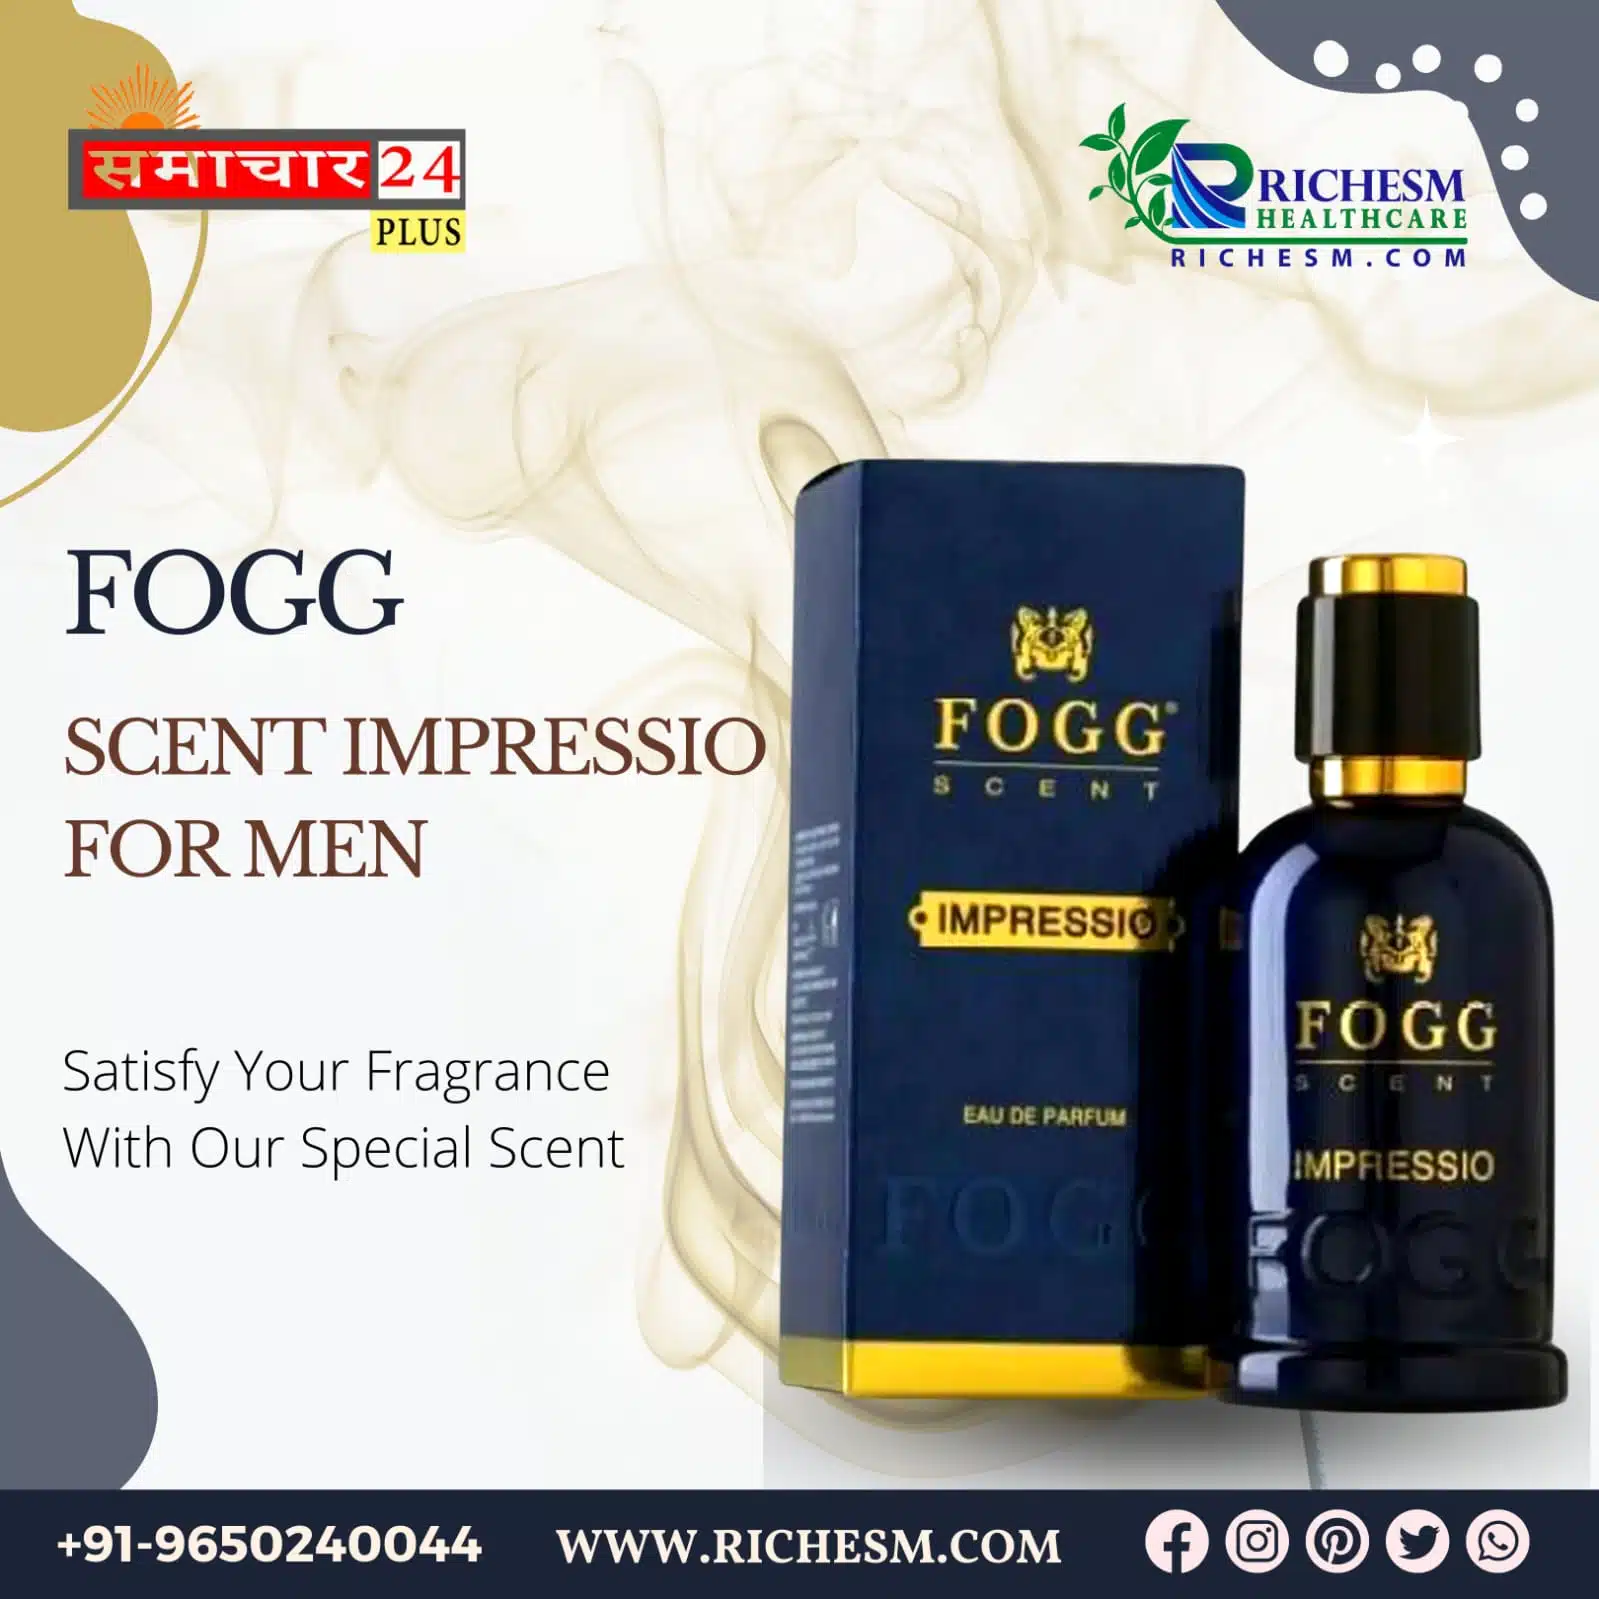 Fogg Scent Impressio Feel Special With Scent For Men